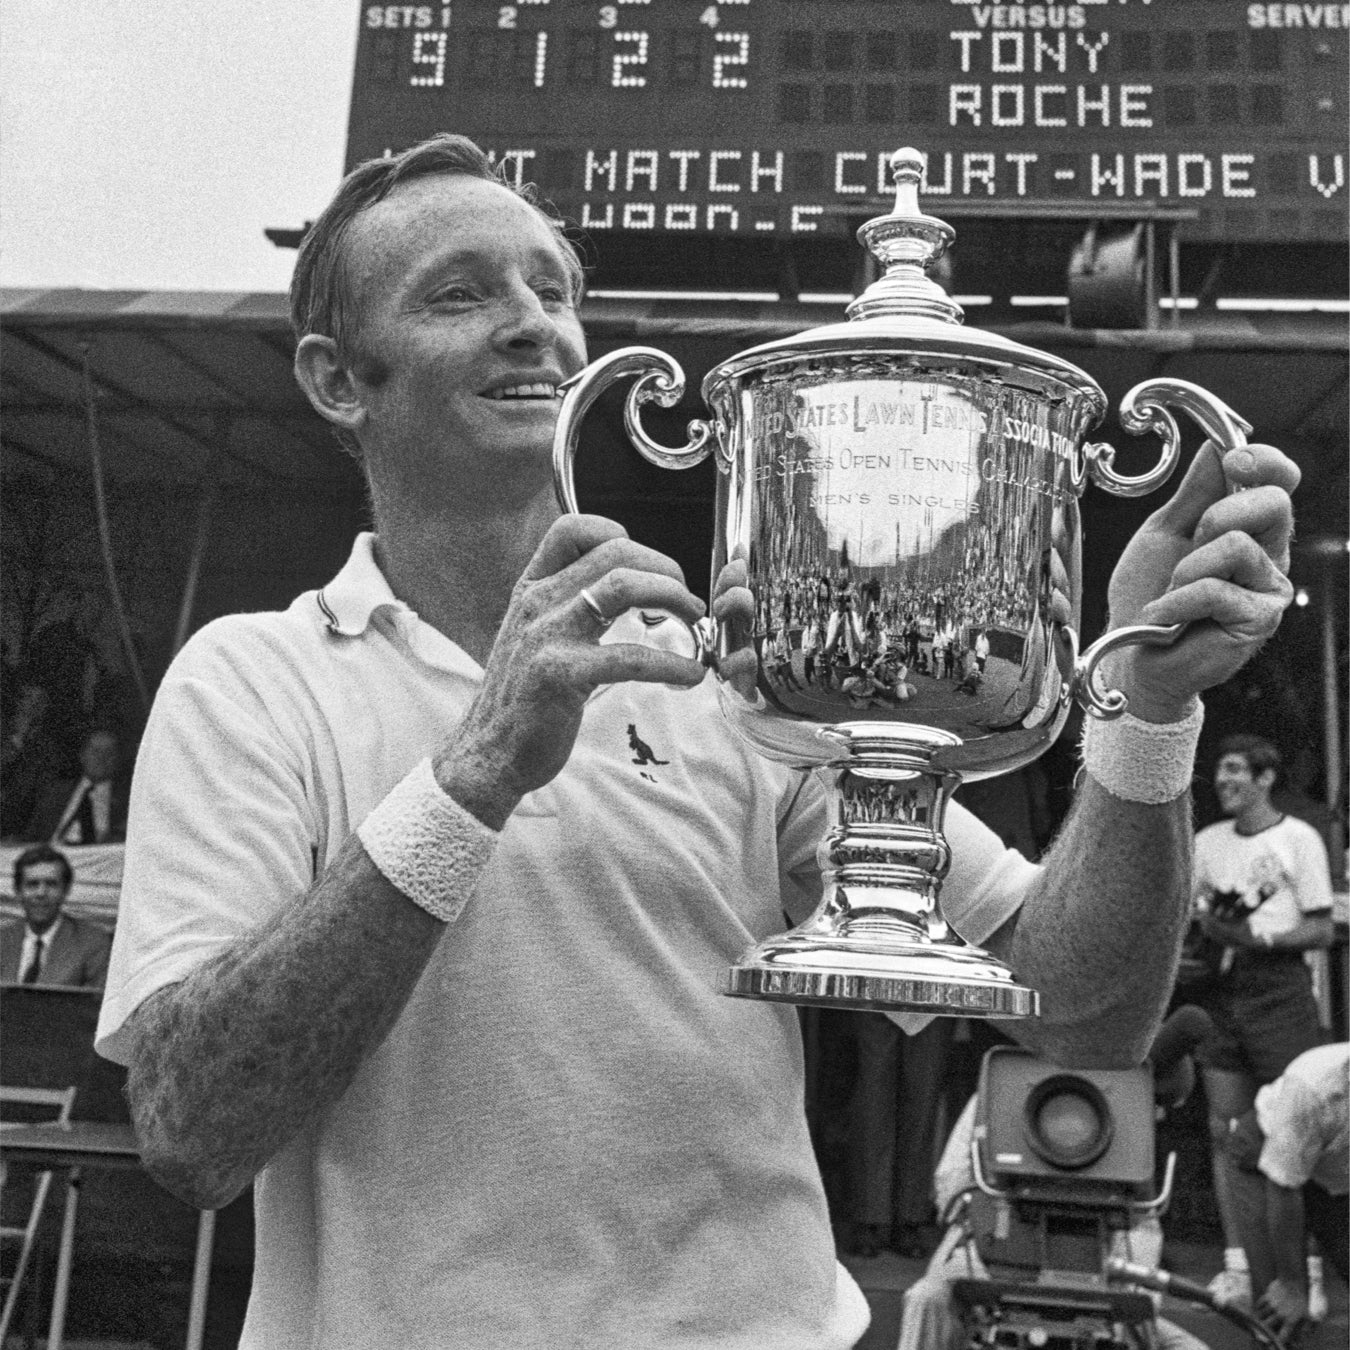 Australian Tennis Player Rod Laver Hold His US Open Trophy